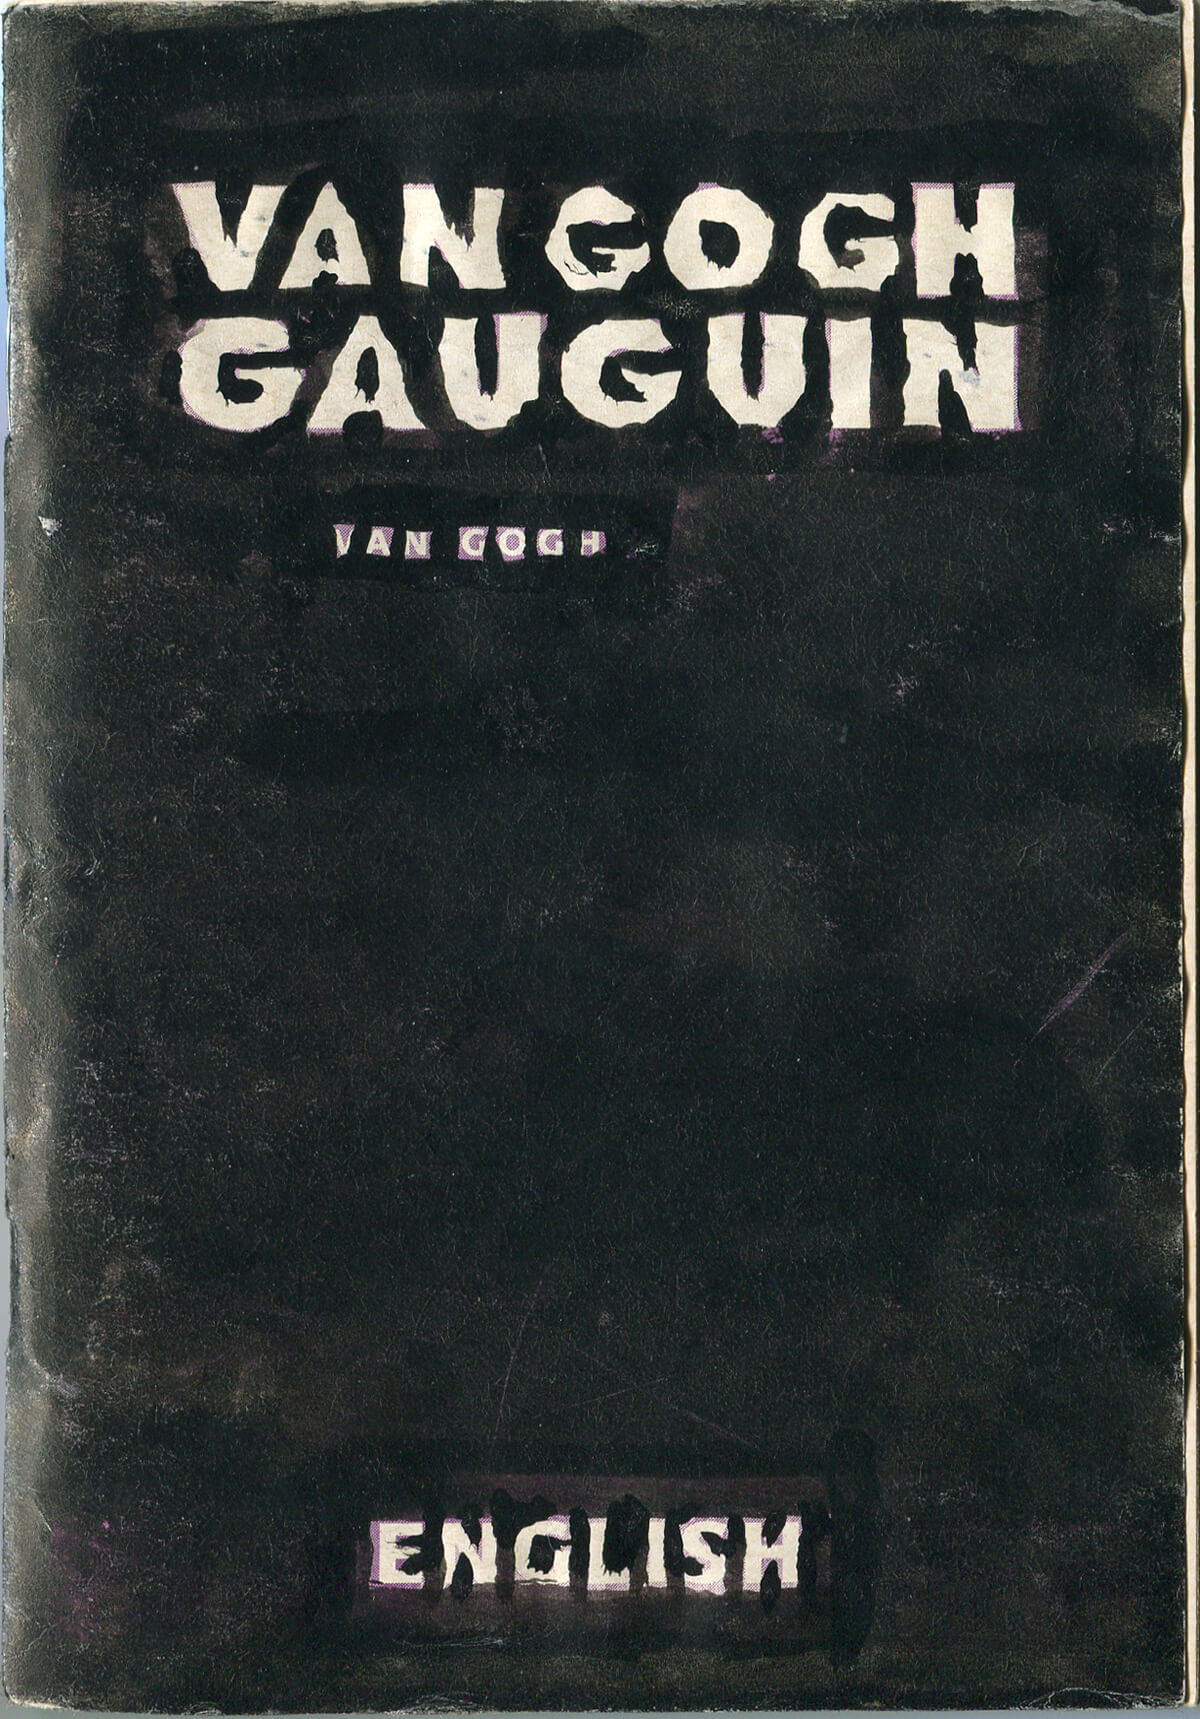 Van Gogh&Gauguin: Characteristics, English version, cover, 15 x 10.4 cm, ink on booklet, 2002